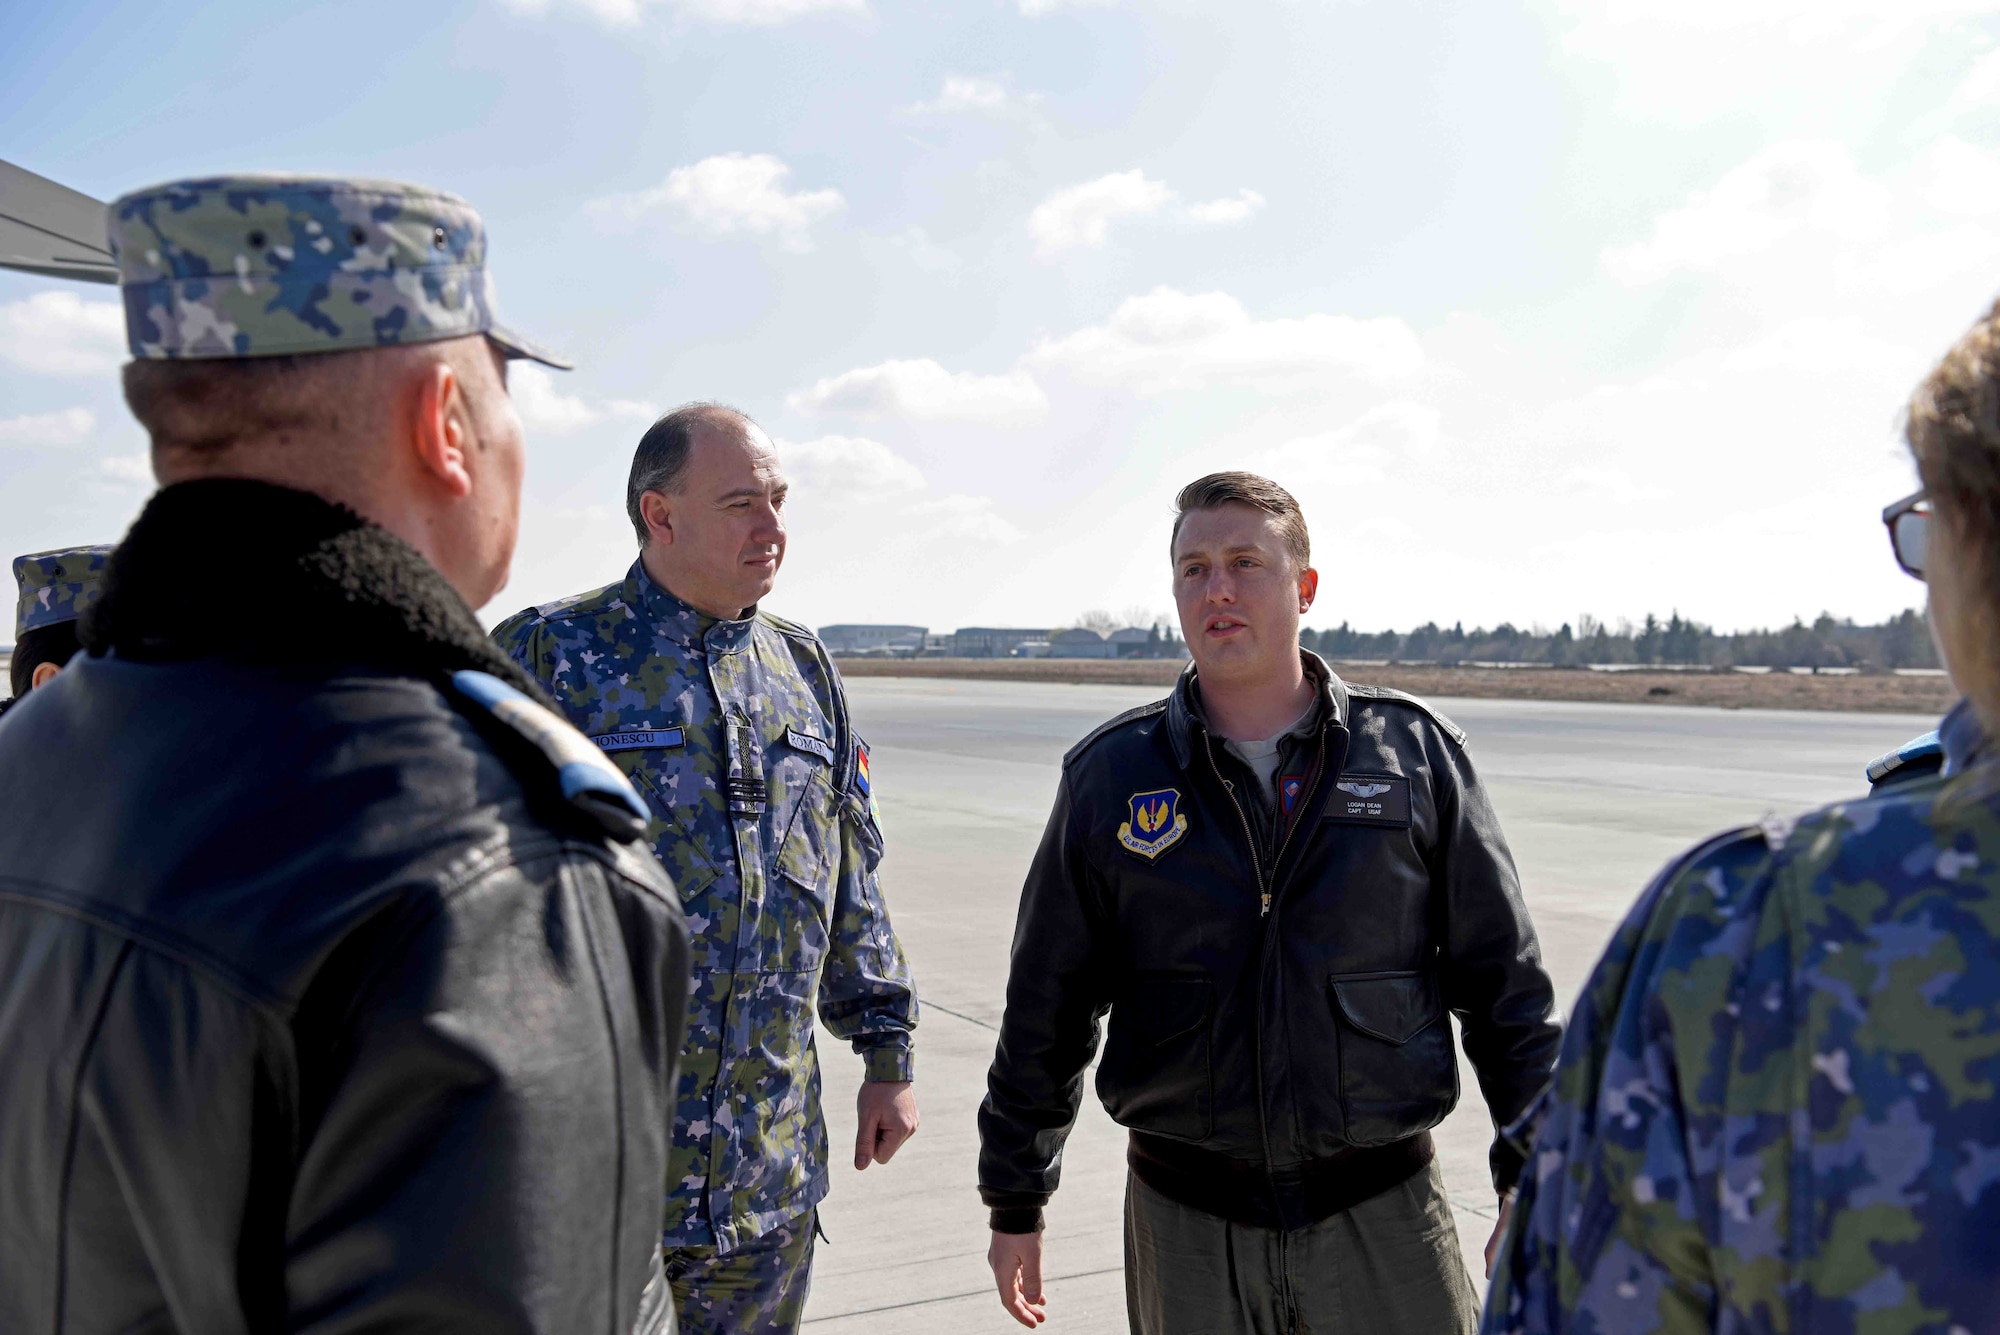 U.S. Air Force Capt. Logan Dean, 351st Air Refueling Squadron pilot, discusses aerial refueling events with Romanian air force members prior to take-off for training with Romanian air force F-16s in Bucharest, Romania, March 13, 2019. The training was an example of U.S. and NATO allies sharing a commitment to promote peace and stability through developing their relationship and communication process. (U.S. Air Force photo by Airman 1st Class Brandon Esau)